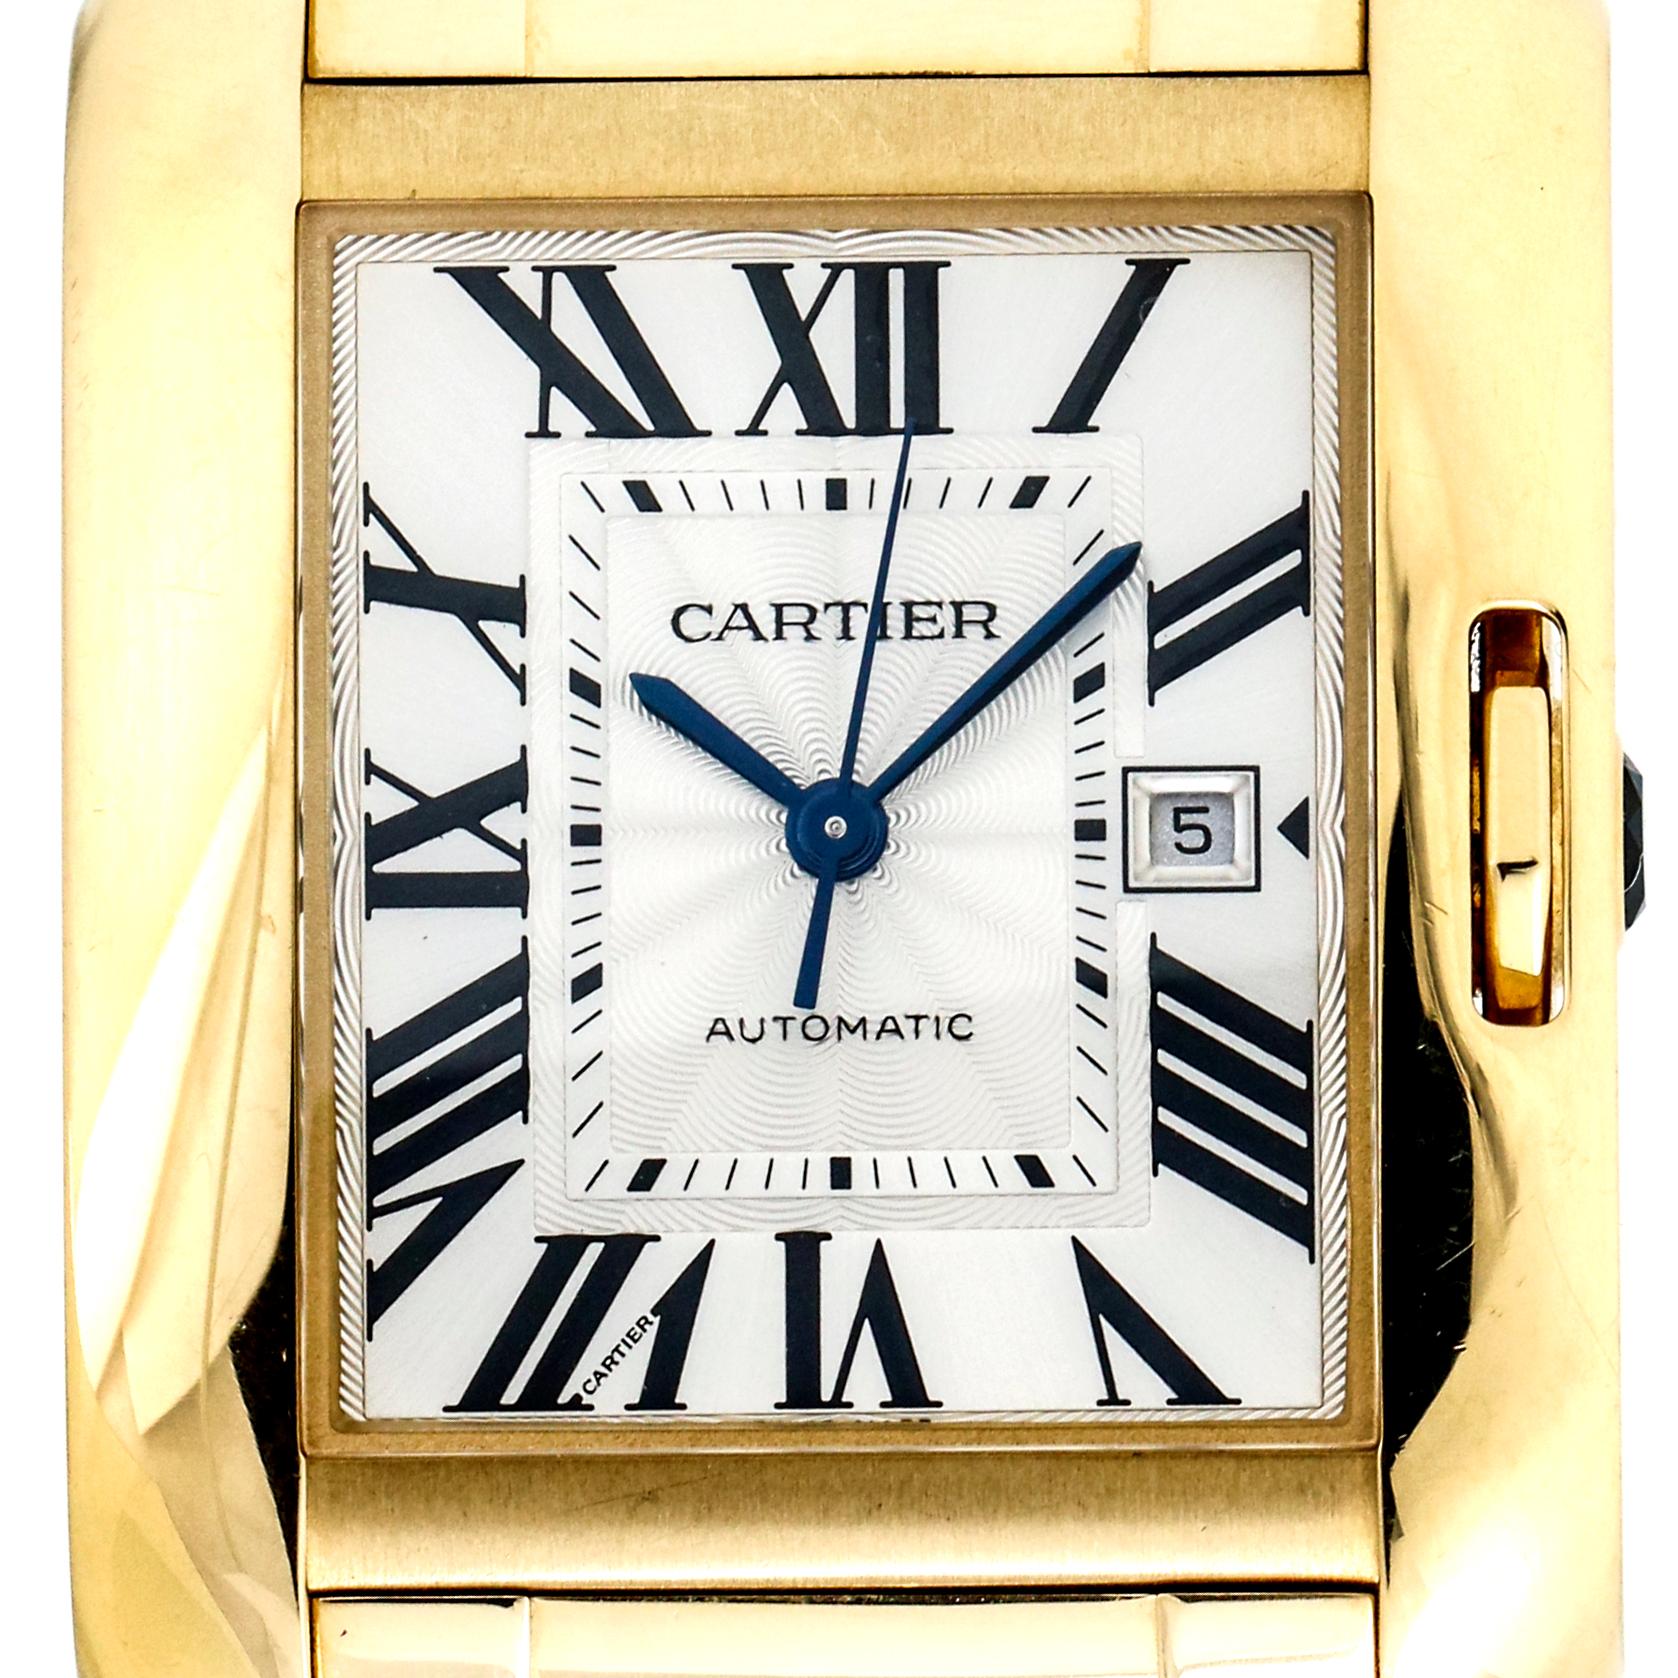 Ladies Cartier Tank Anglaise watch crafted in 18-karat yellow gold with lacquered silver dial. Signature blue sword hands and sapphire crown. Folding deployment buckle clasp. 

Case, 30mm x 39mm
Case Thickness, 10mm
Bracelet, 6.5 inches 
Lugs,